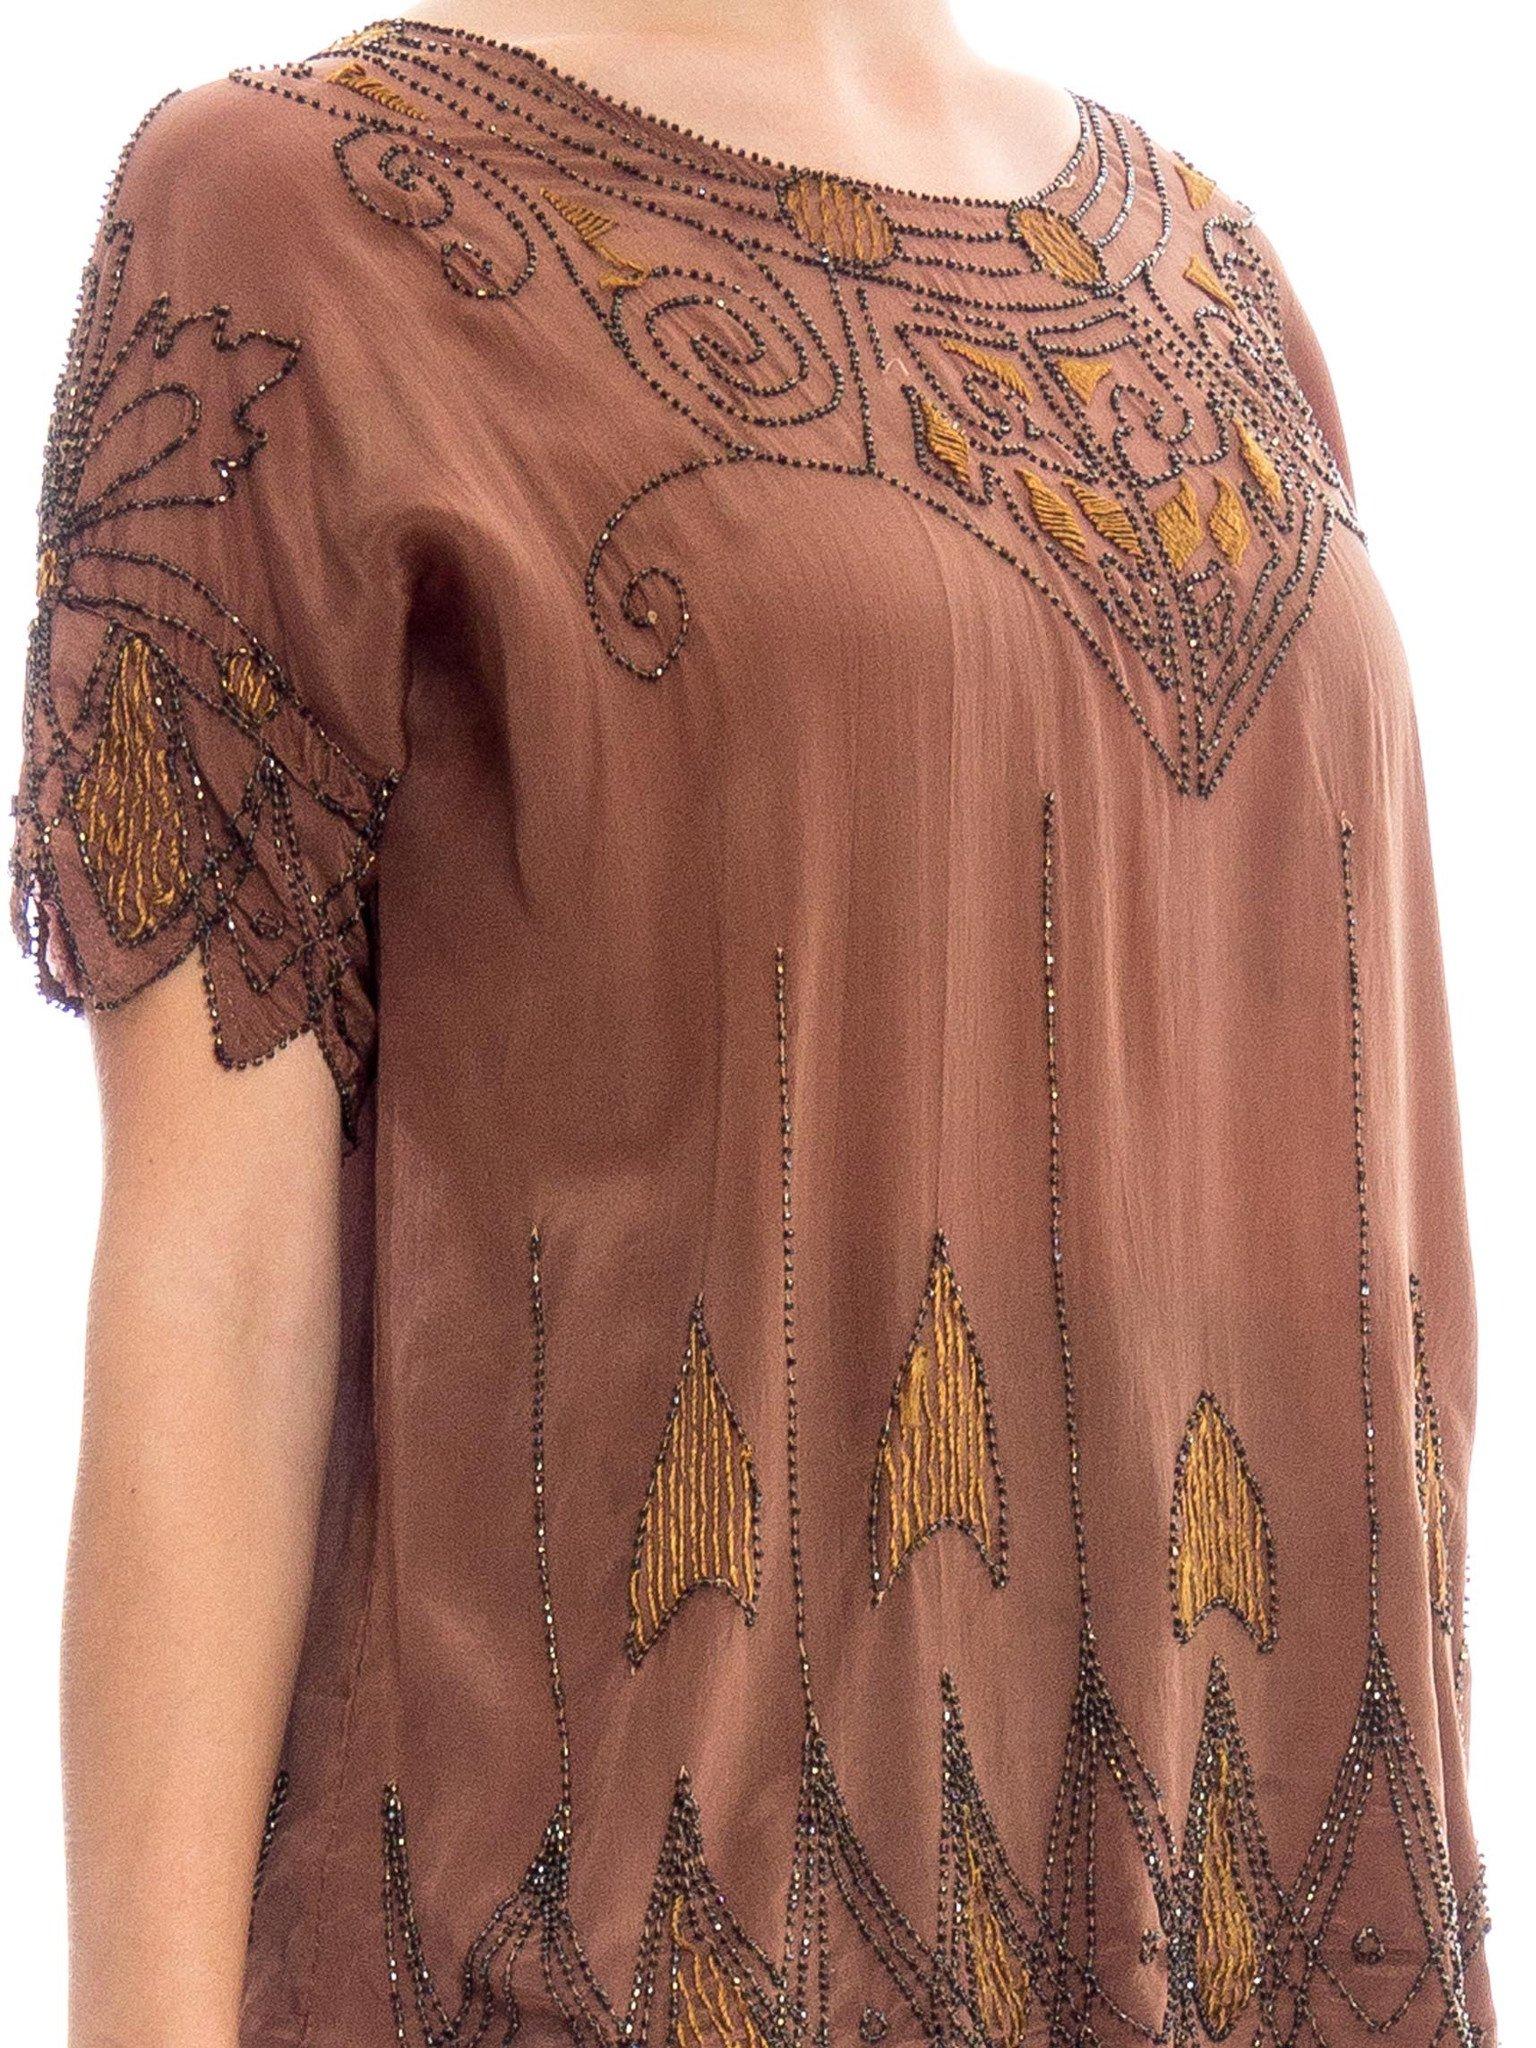 1920S Silk Crepe De Chine Deco Beaded & Embroidered Top For Sale 3